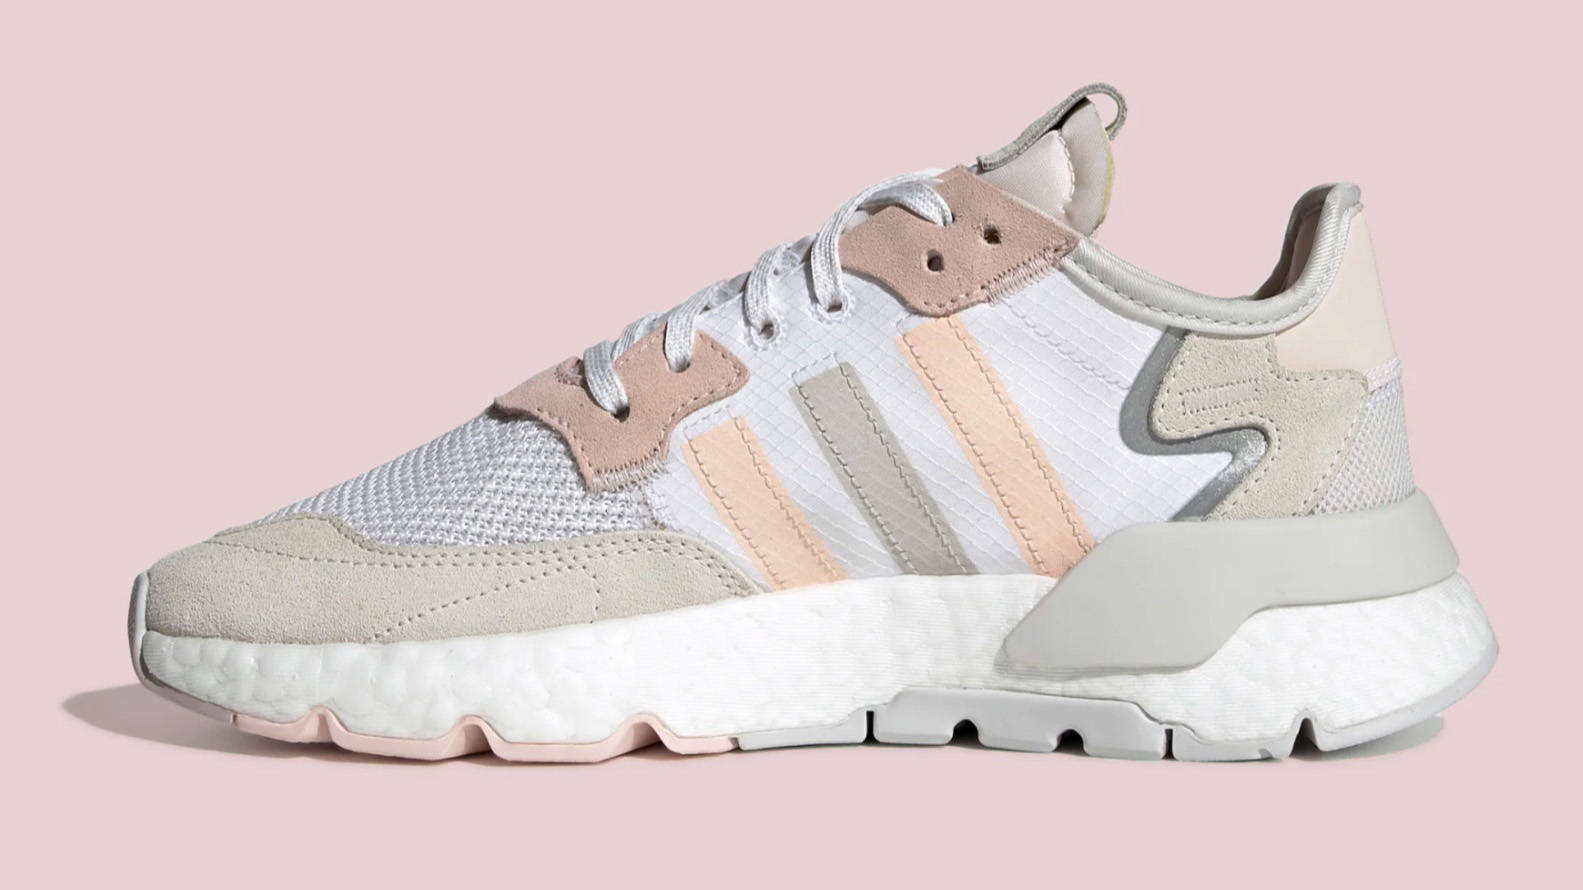 The adidas Nite Jogger Looks Pretty In Icey Pink | The Sole Supplier